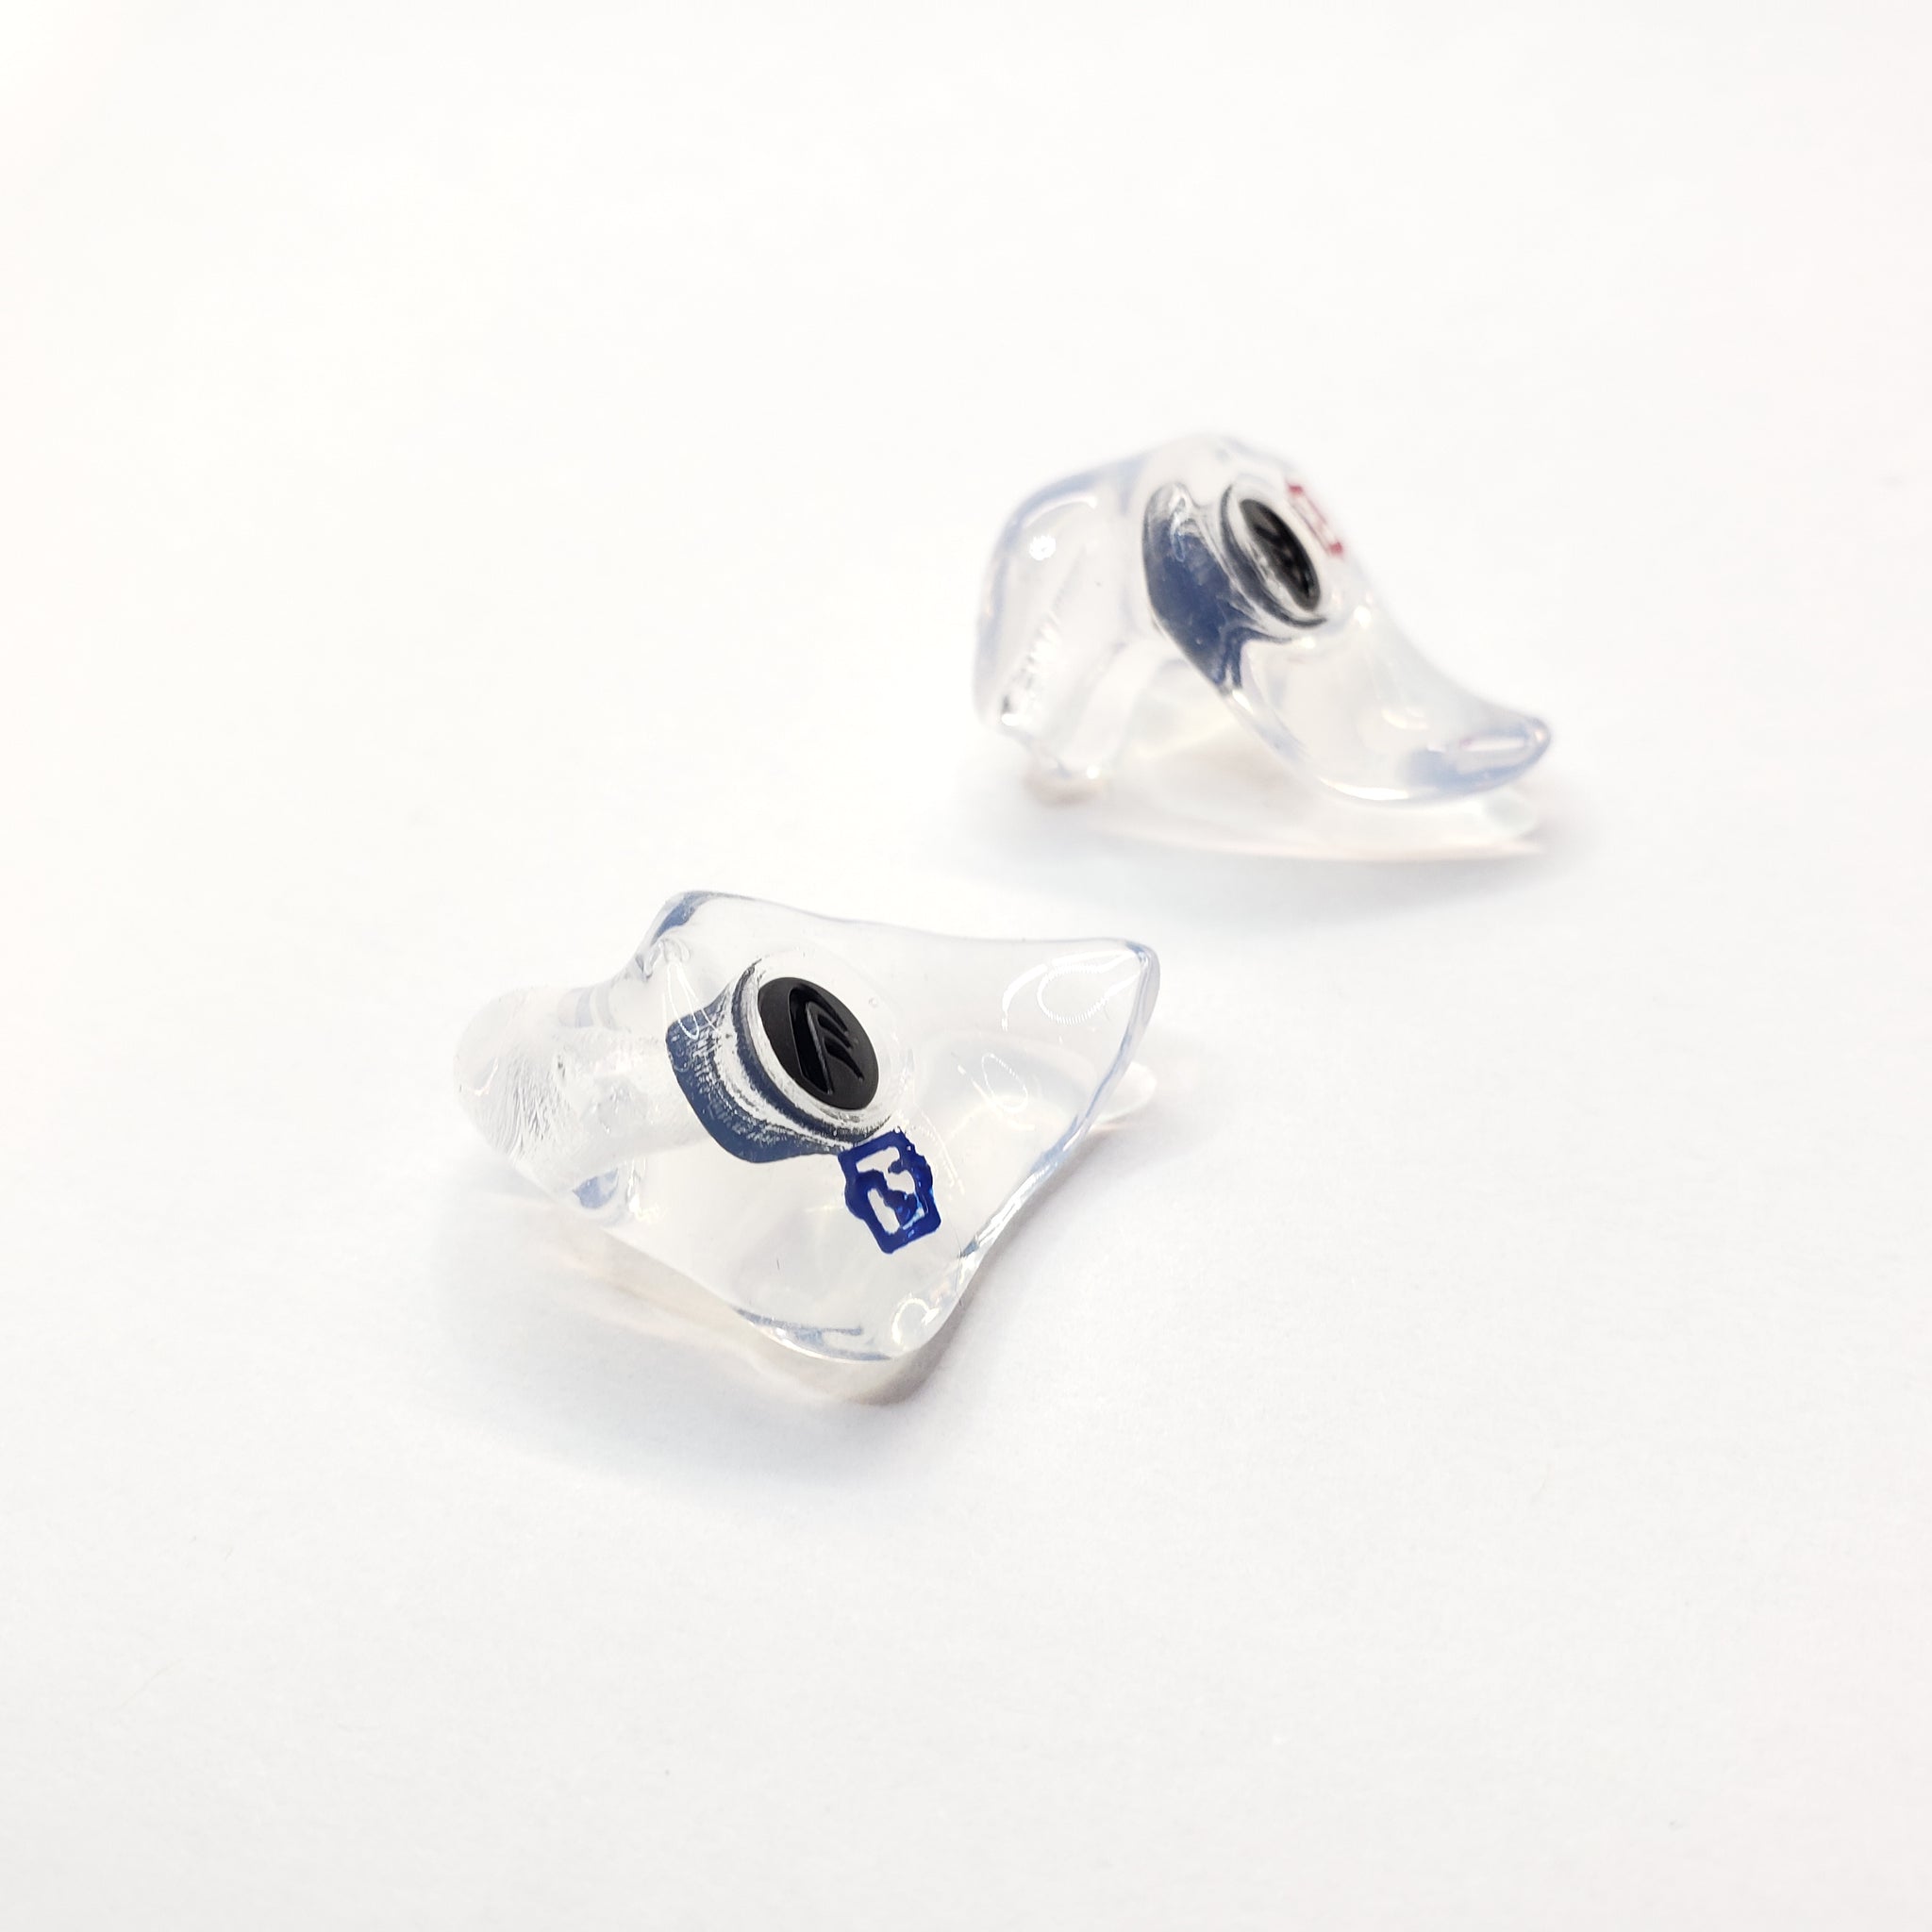 Article: Should You Wear Ear Plugs at Concerts?